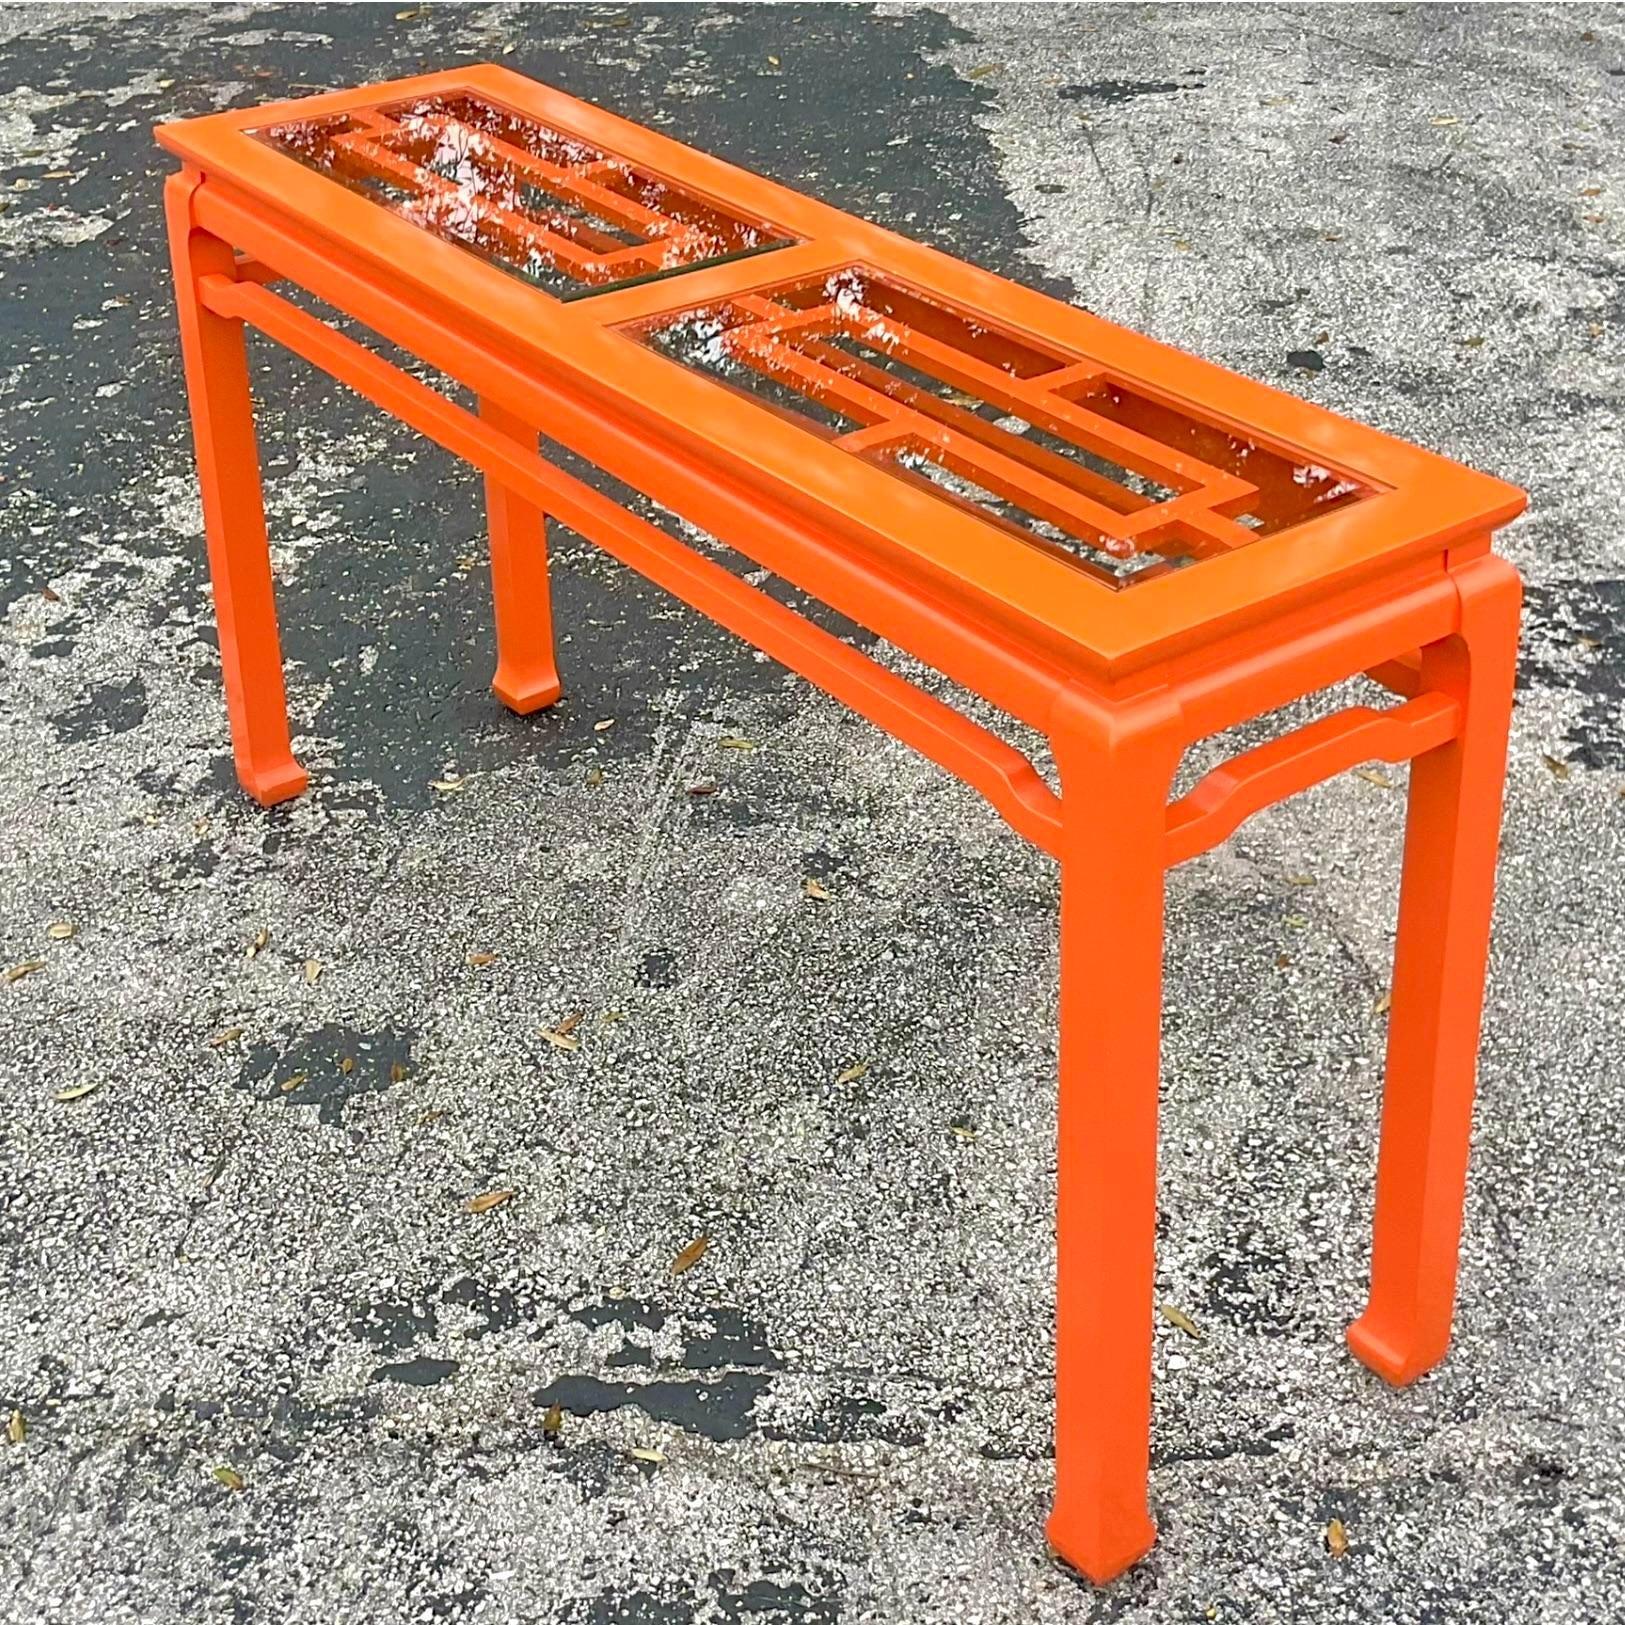 Glass Late 20th Century Vintage Regency Orange Lacquered Fretwork Console Table For Sale